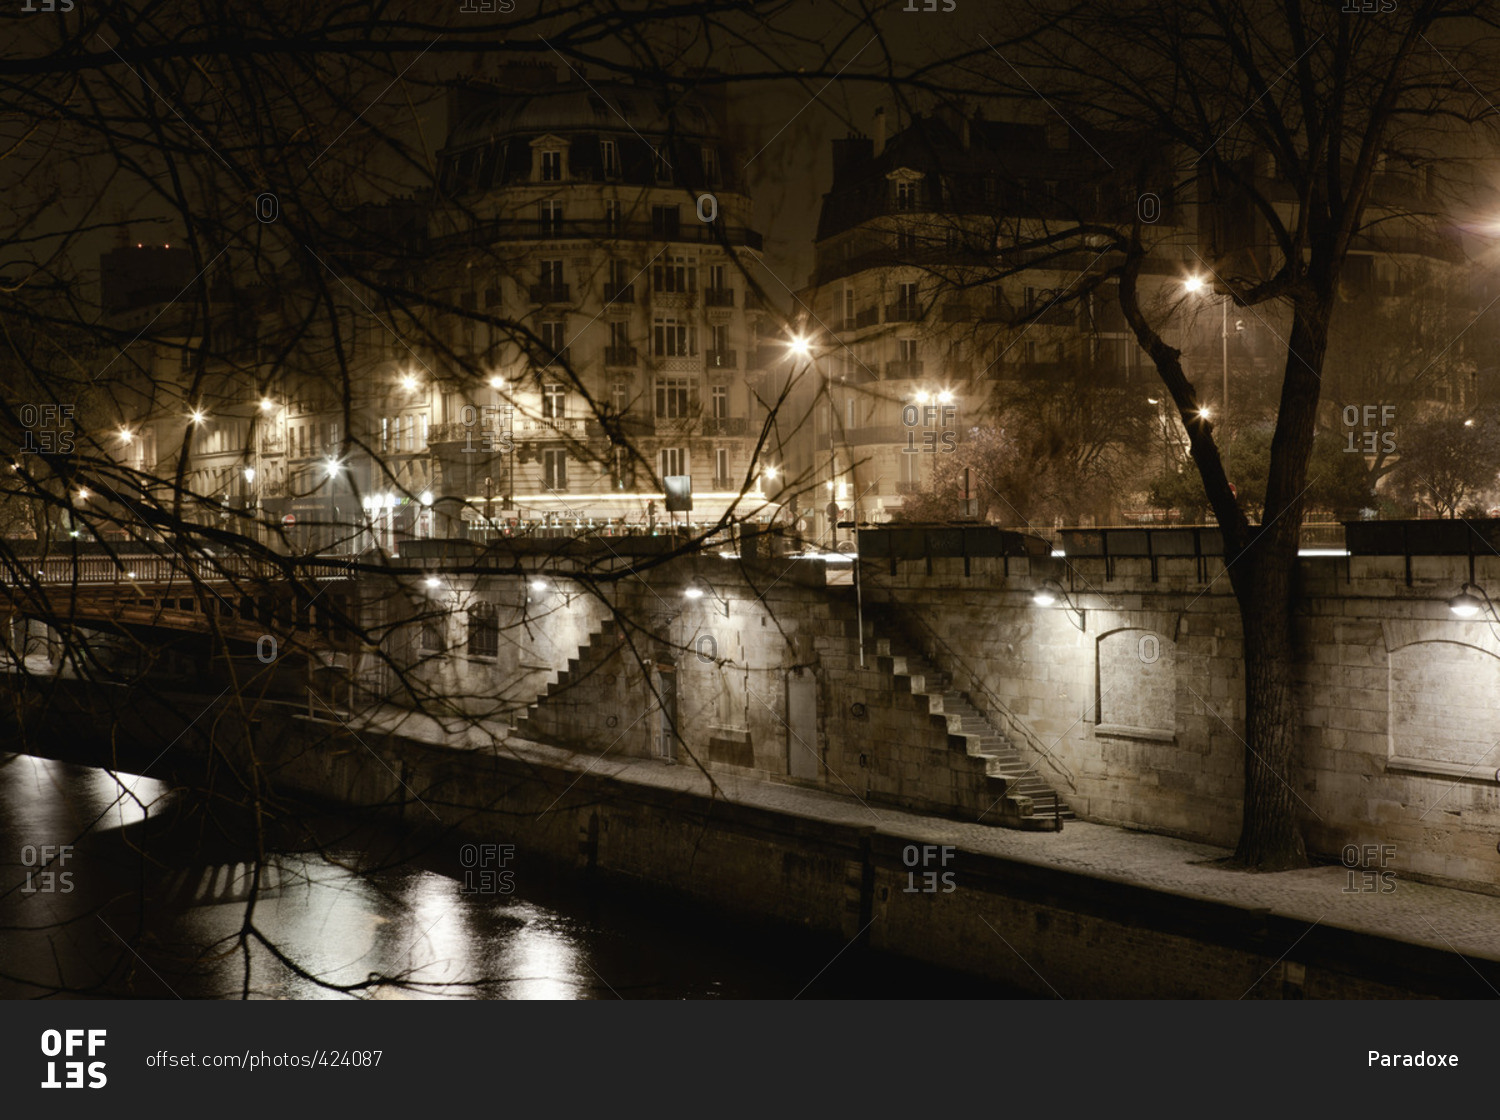 Bank of Seine river by night, Paris, France